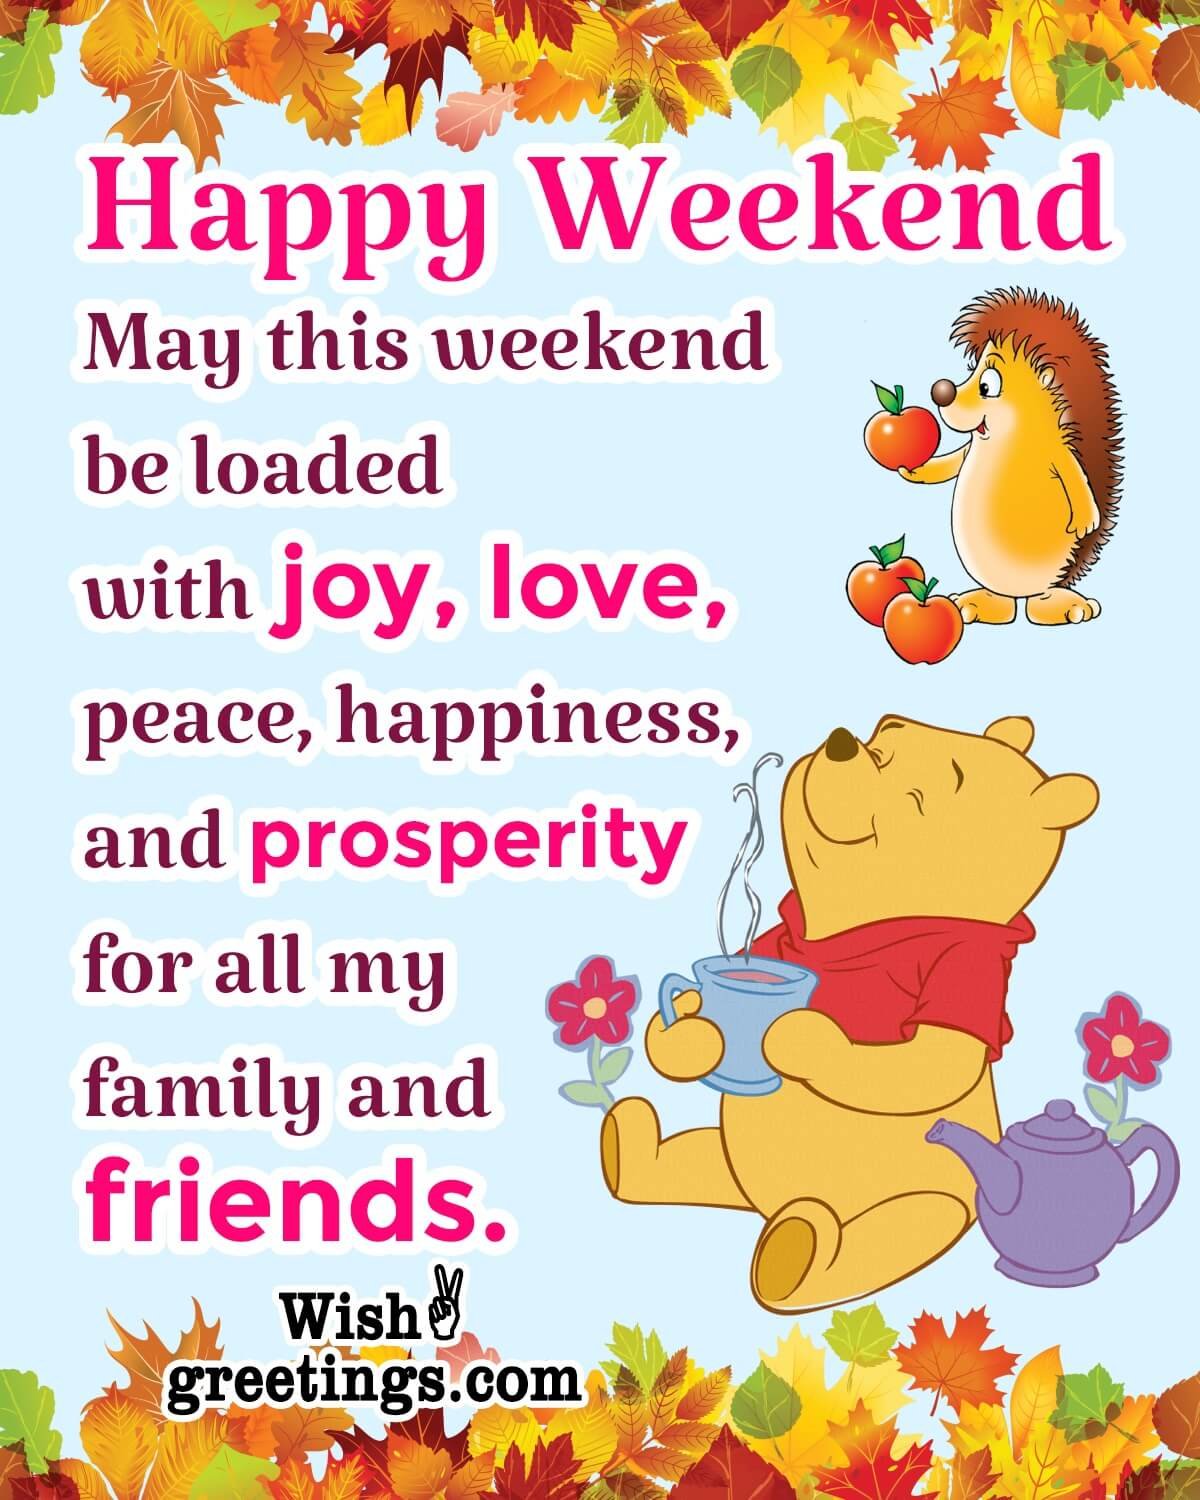 Happy Weekend Message Pic For Friends And Family